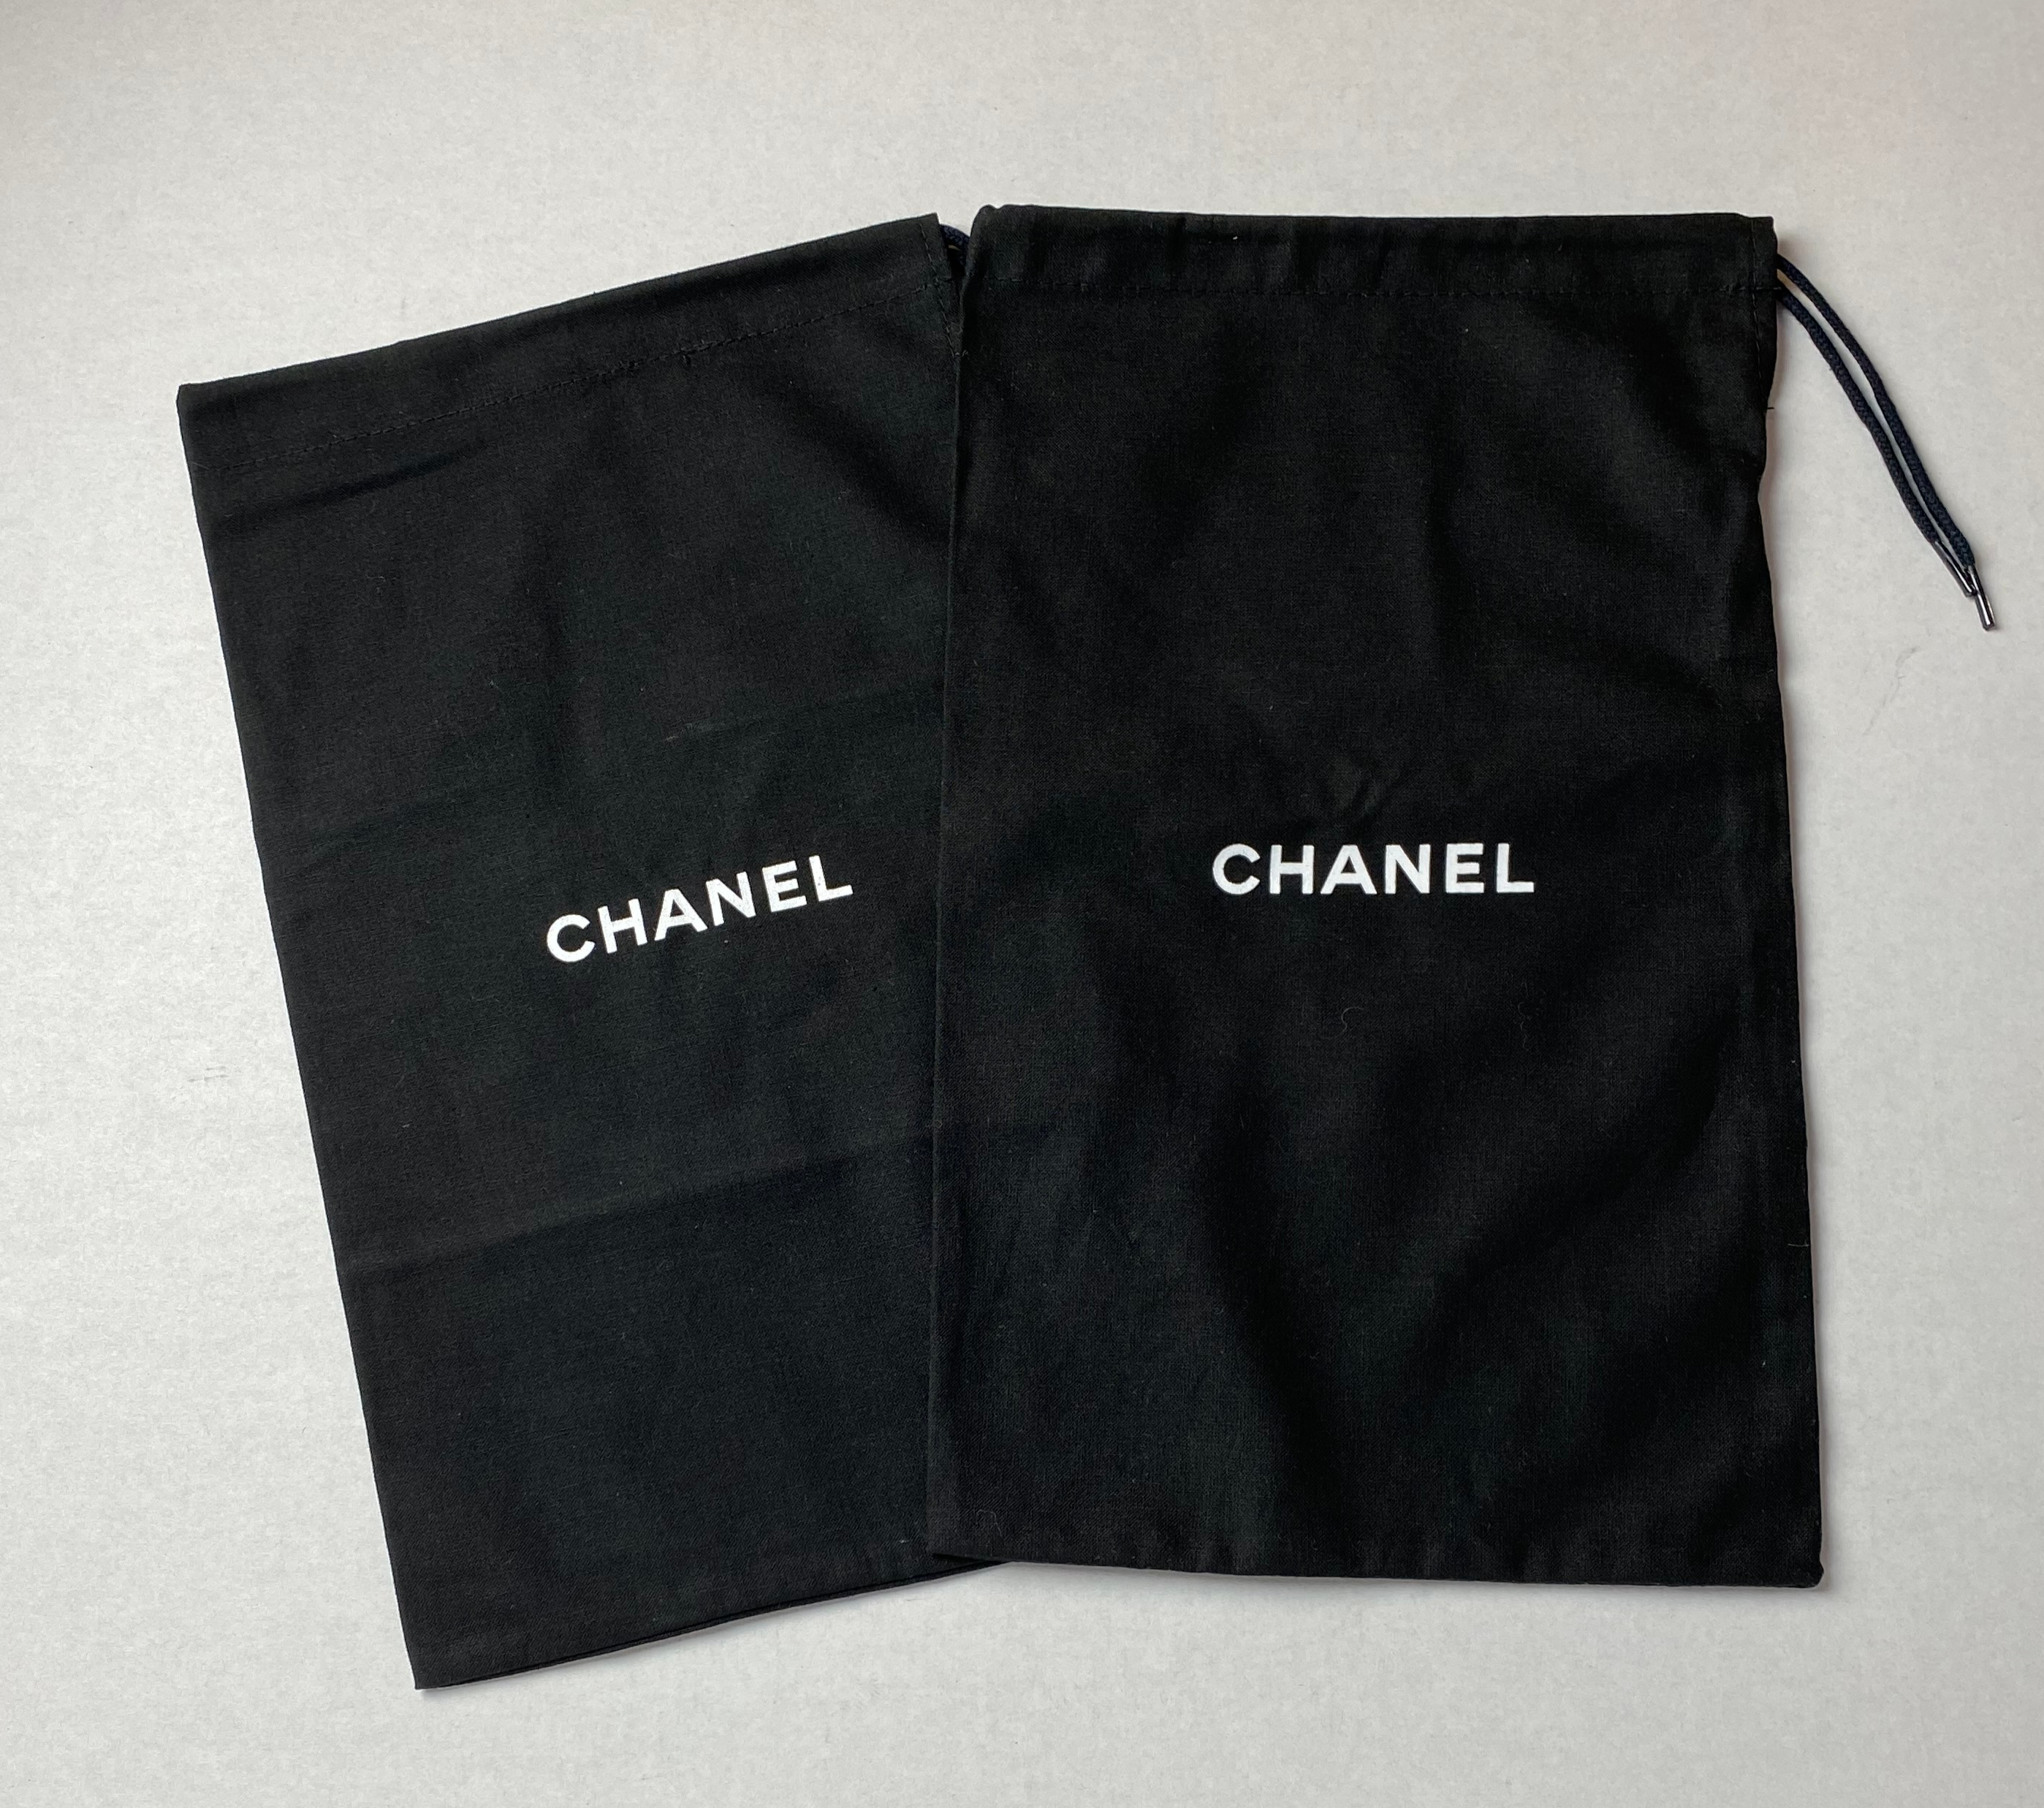 Chanel Maxi Classic Single Flap in Black Quilted Caviar Leather